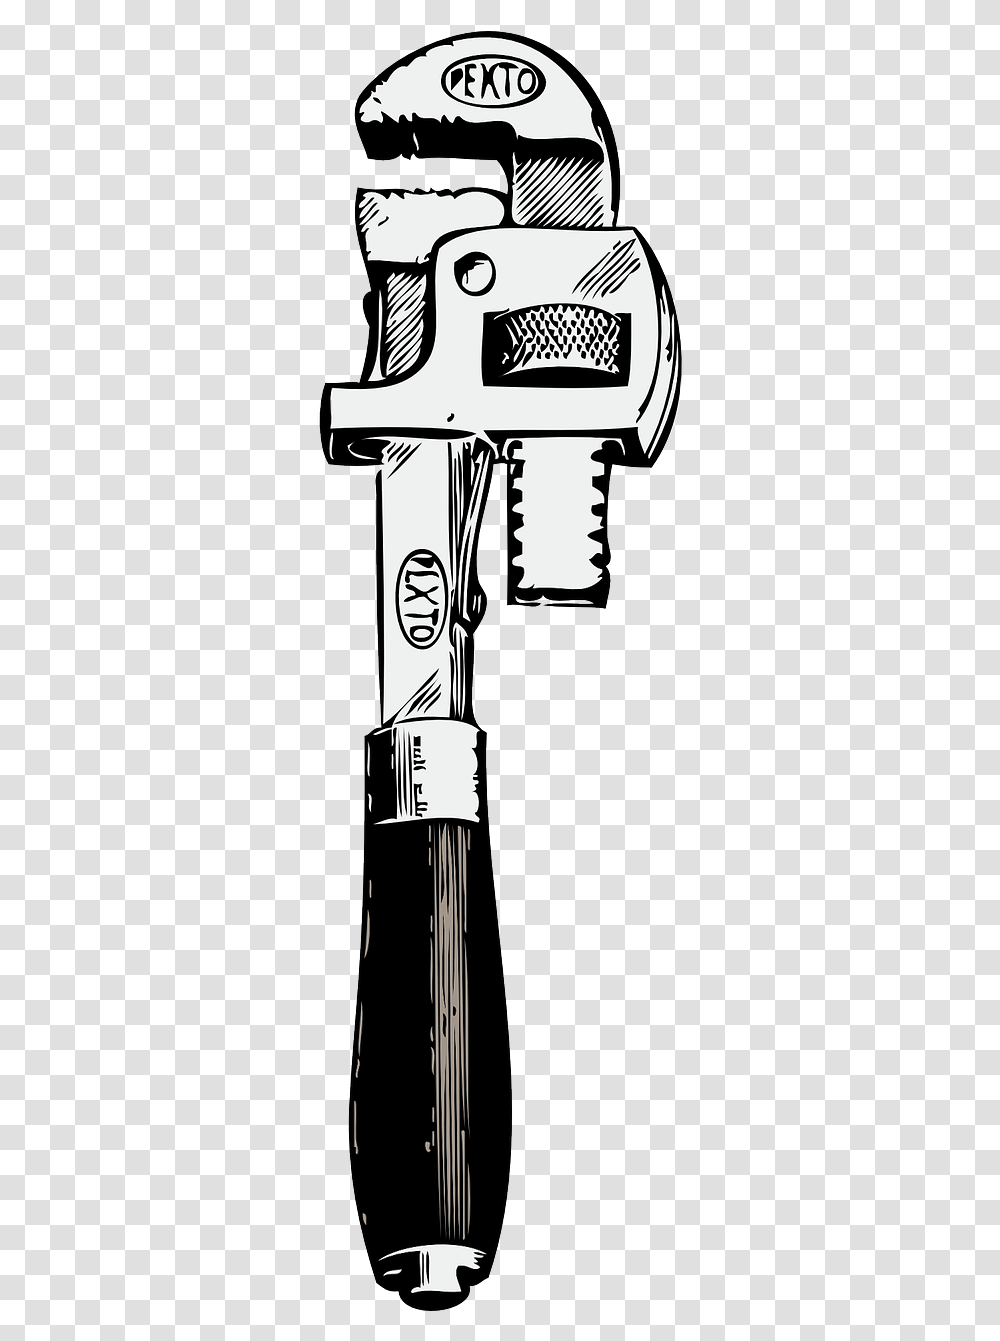 Plumbing Pipes, Architecture, Building, Weapon, Weaponry Transparent Png